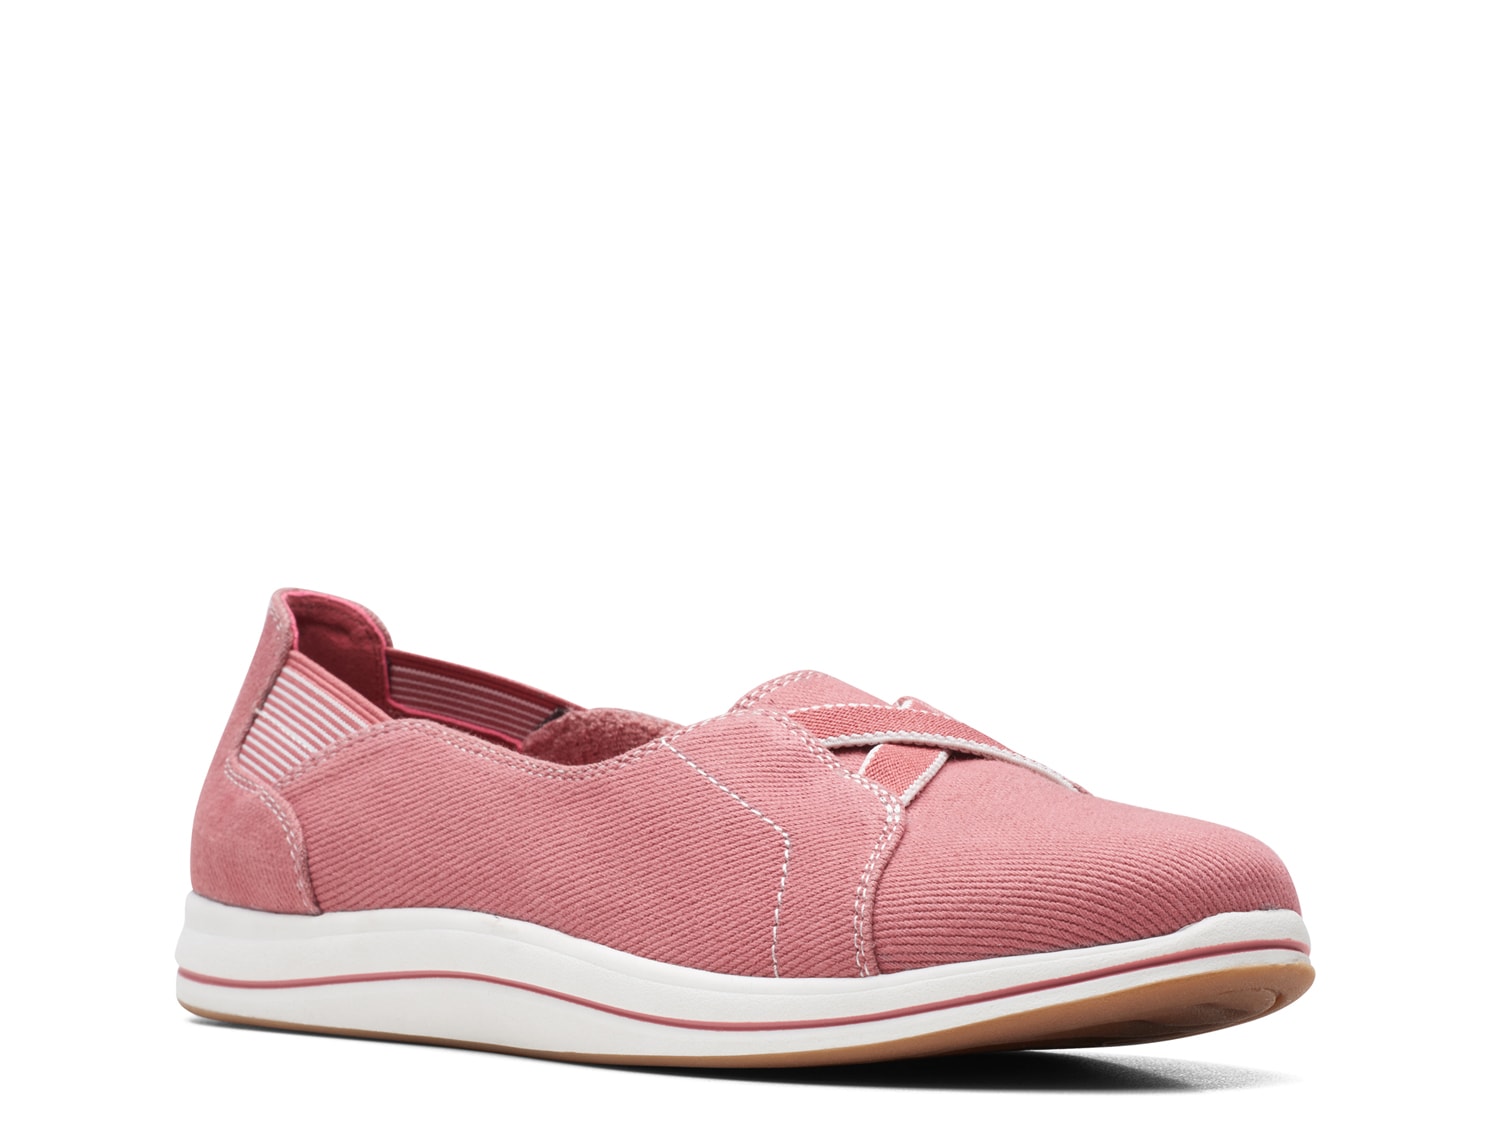 Clarks Cloudsteppers Breeze Skip Slip-On - Free Shipping | DSW